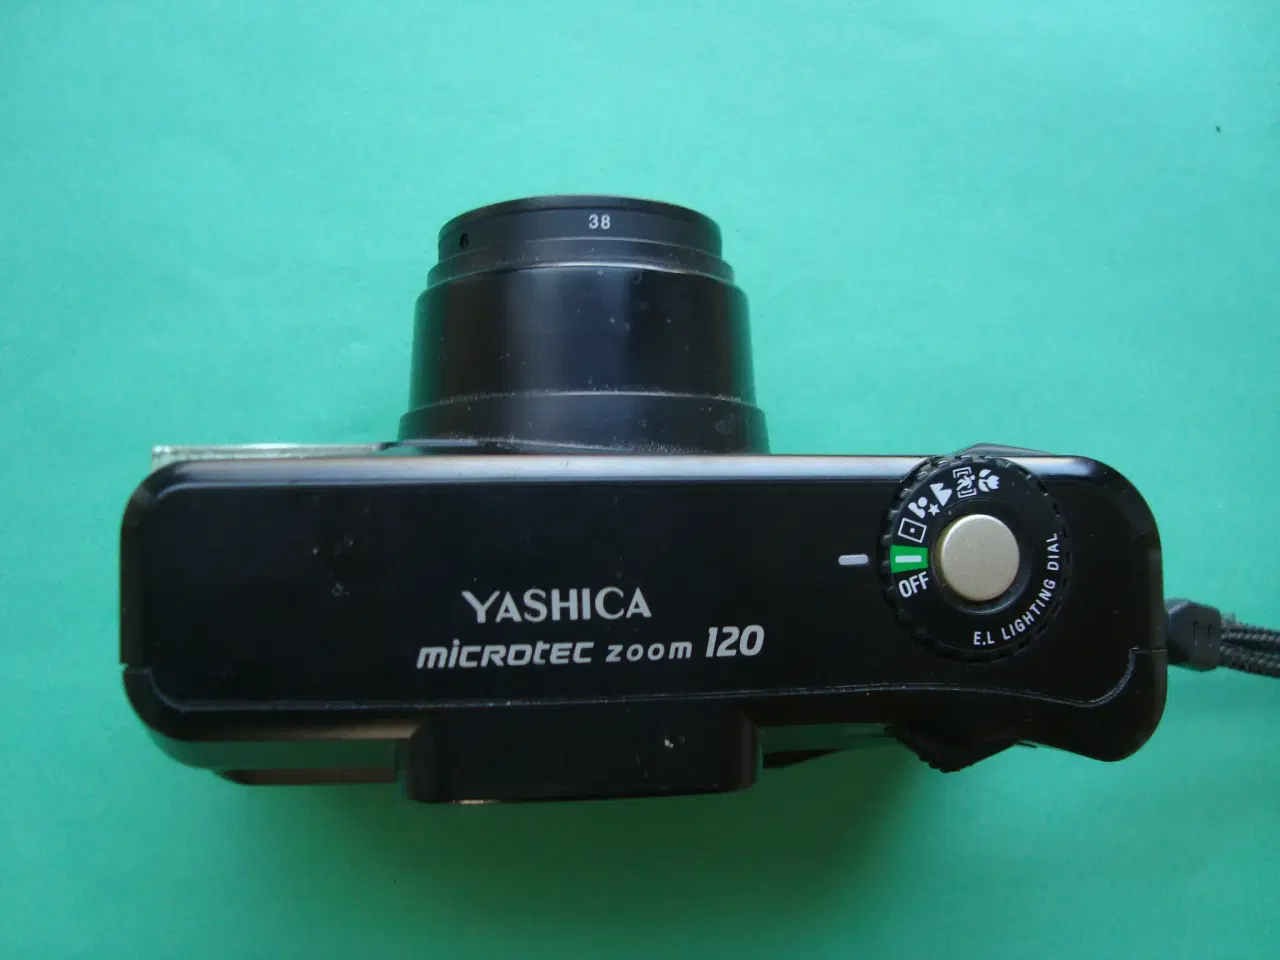 Billede 2 - Yashica microtex zoom 120